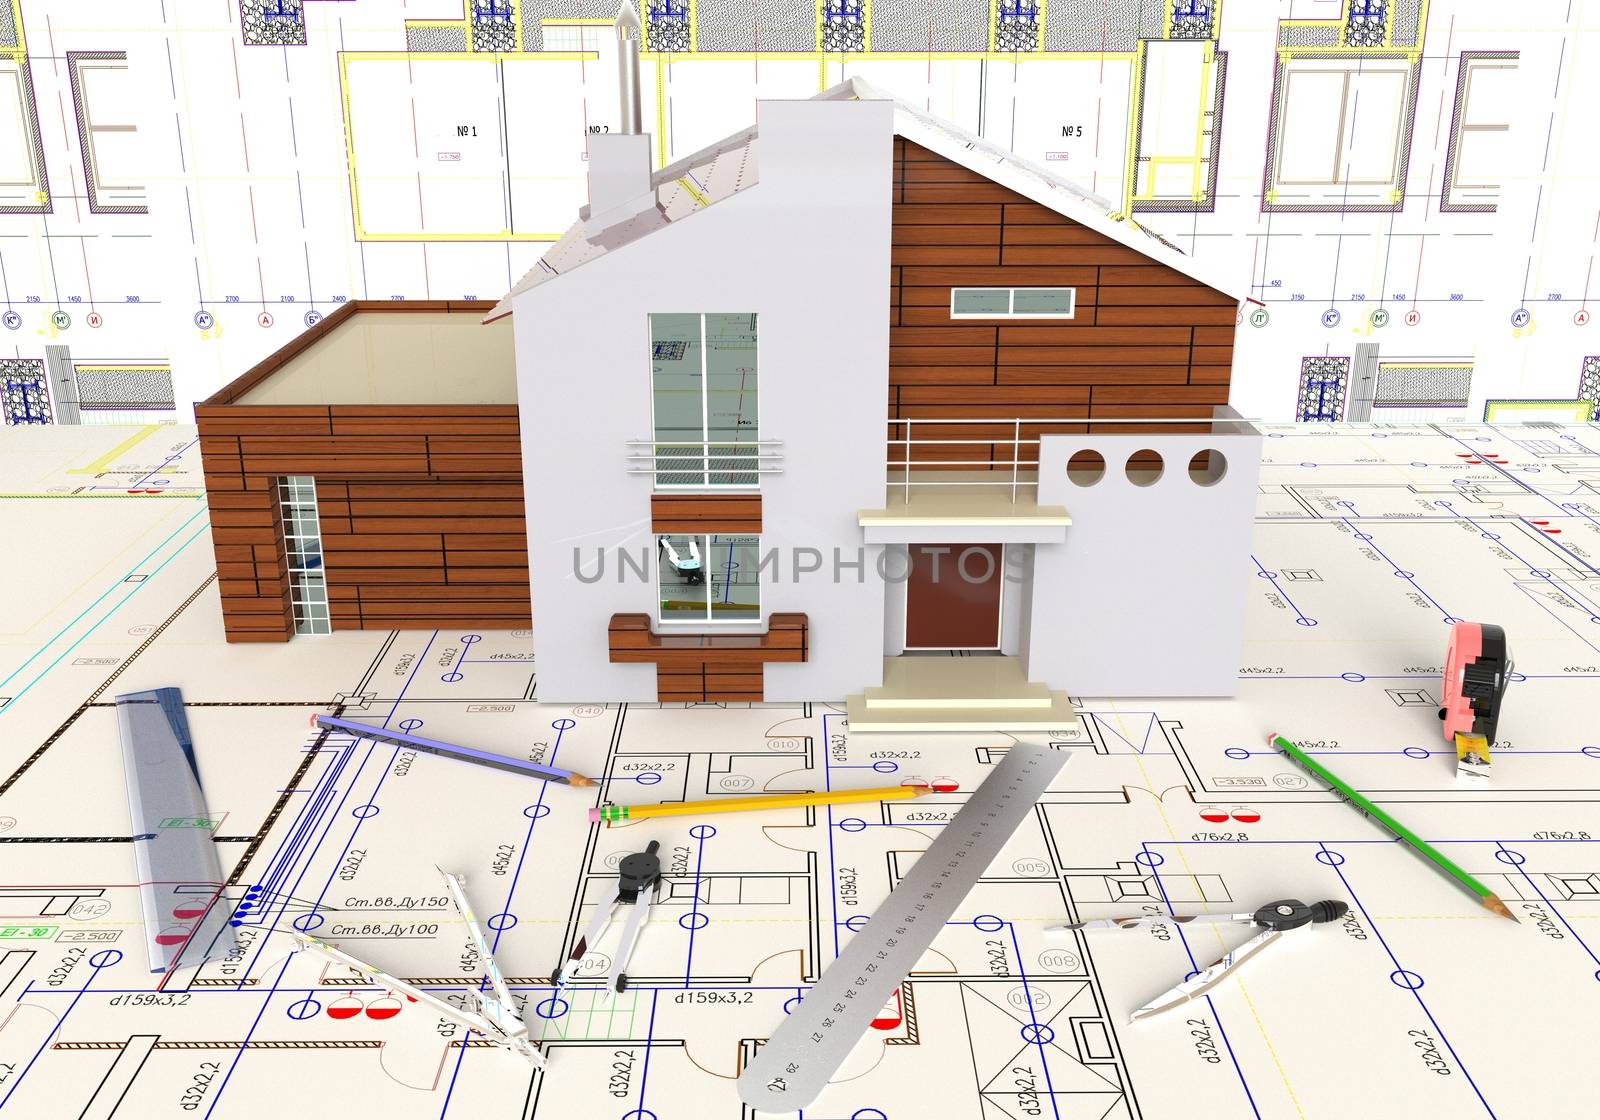 House Layout And Architectural Drawings by vik173